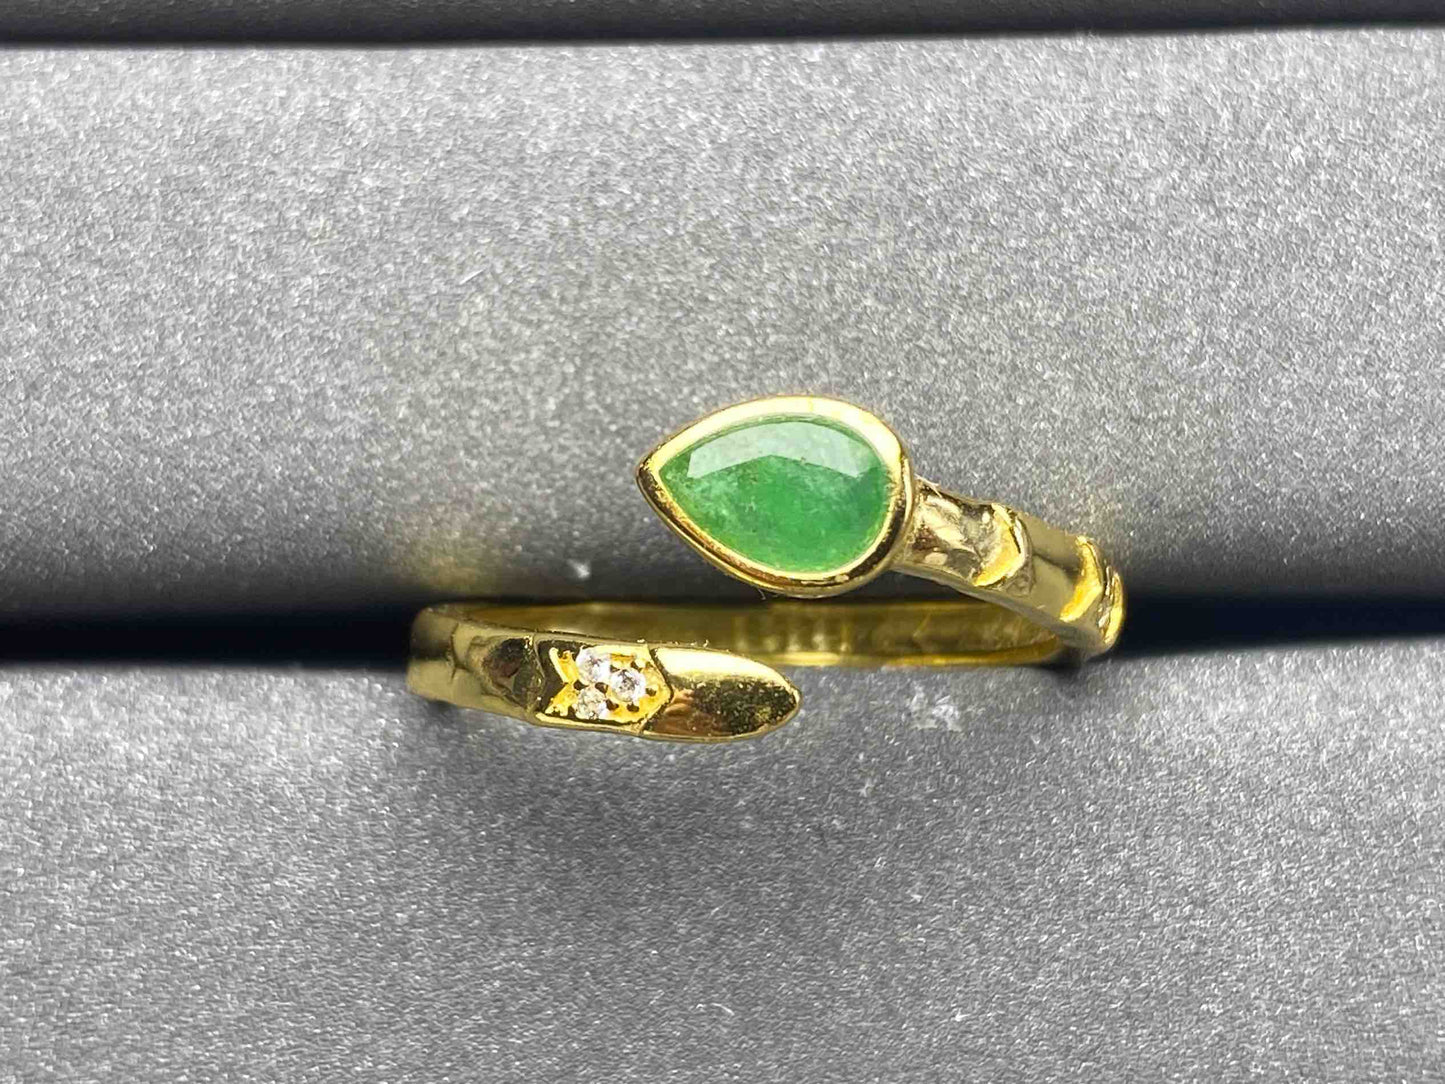 A501 Emerald Ring